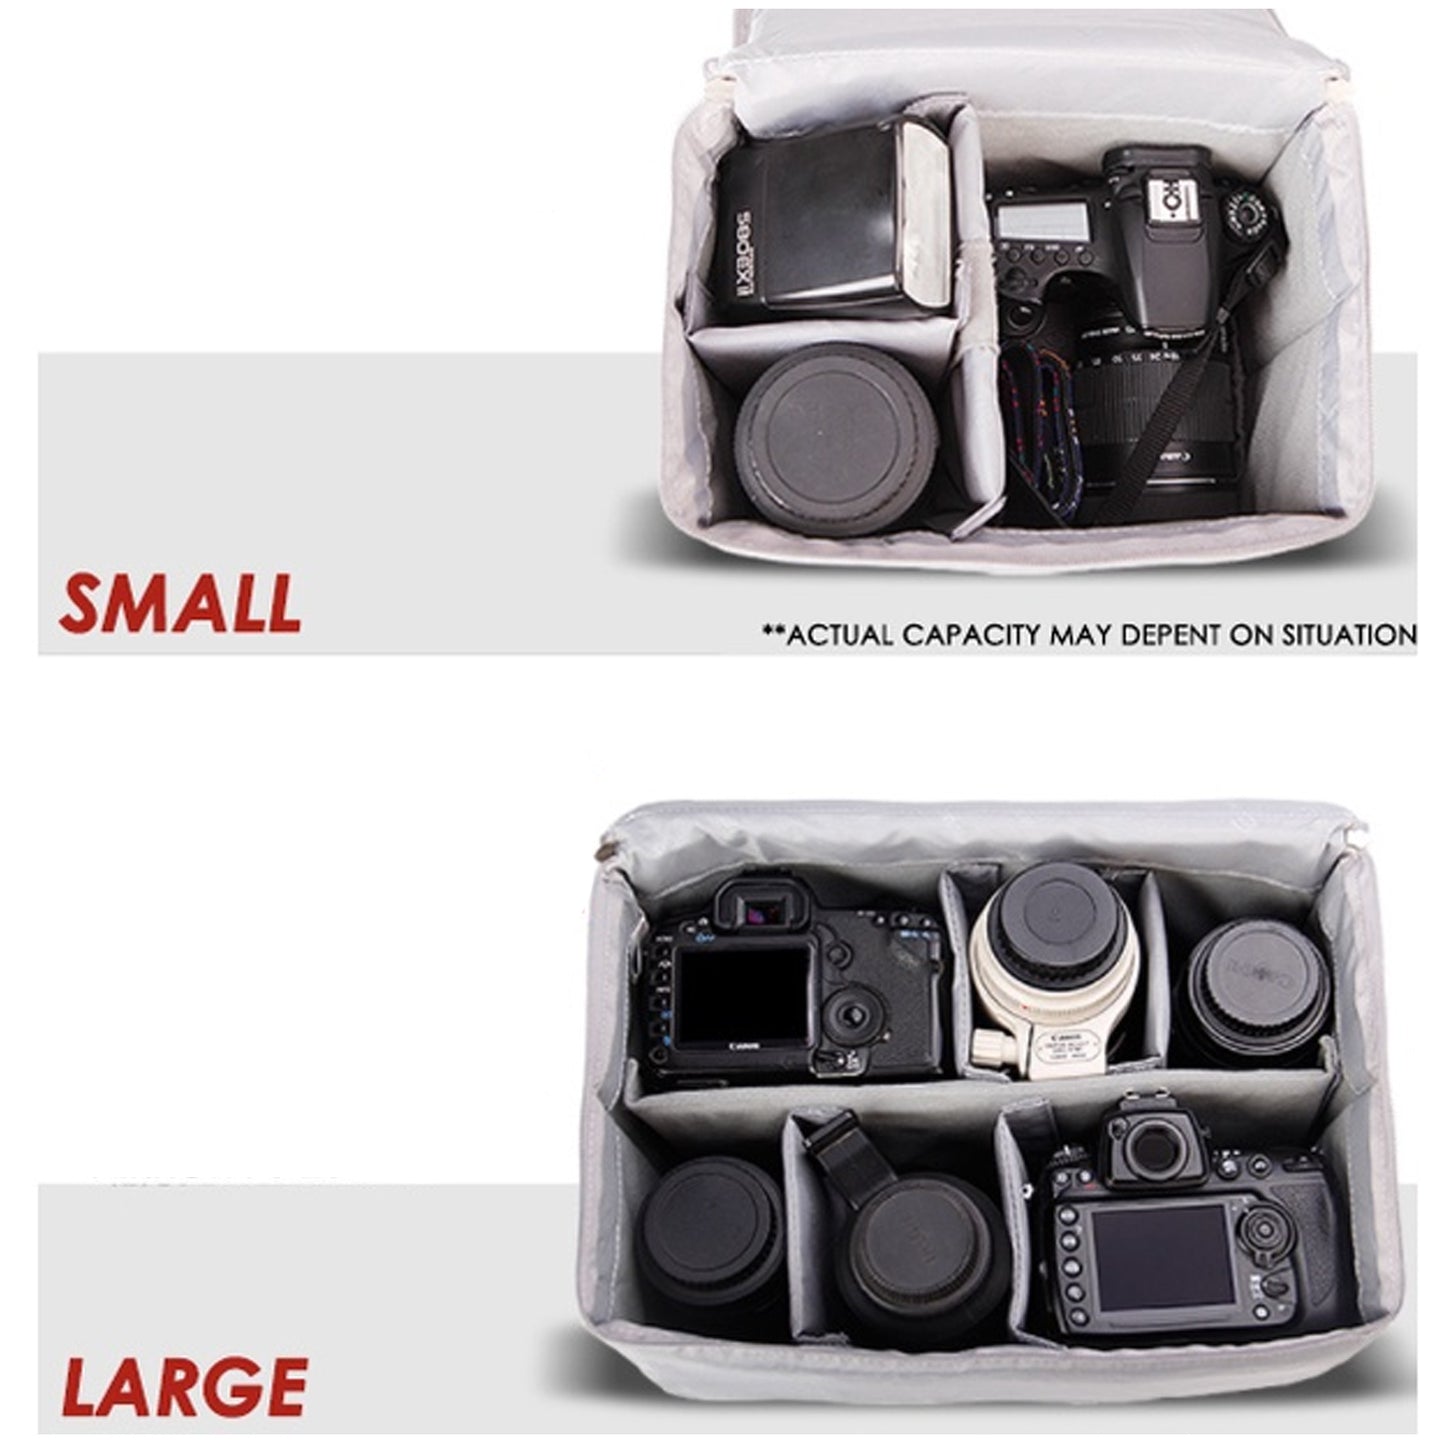 Eirmai BI06 Foldable & Portable Camera Lens Protective Liner Bag for Eirmai Dry Box (Available in Small and Large Size)